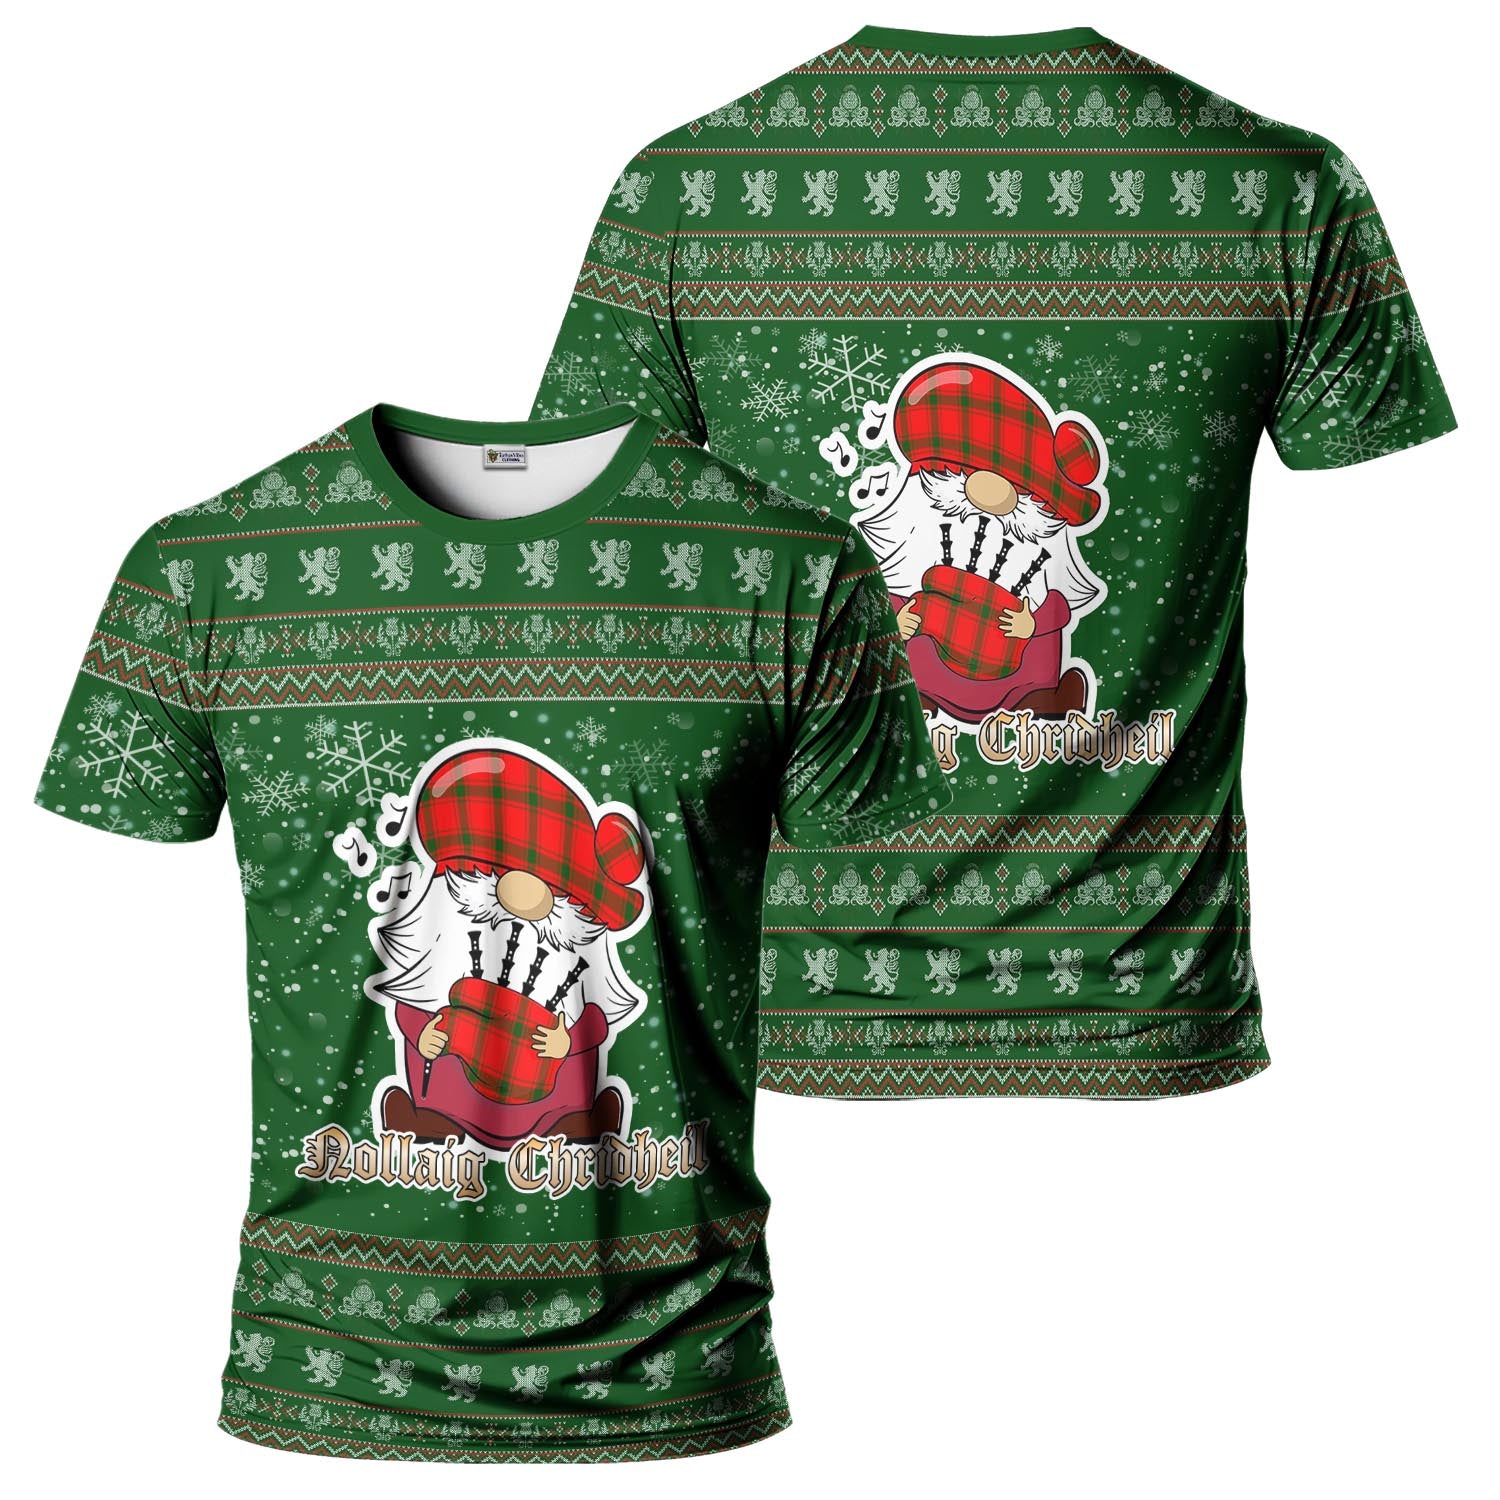 Darroch Clan Christmas Family T-Shirt with Funny Gnome Playing Bagpipes Men's Shirt Green - Tartanvibesclothing